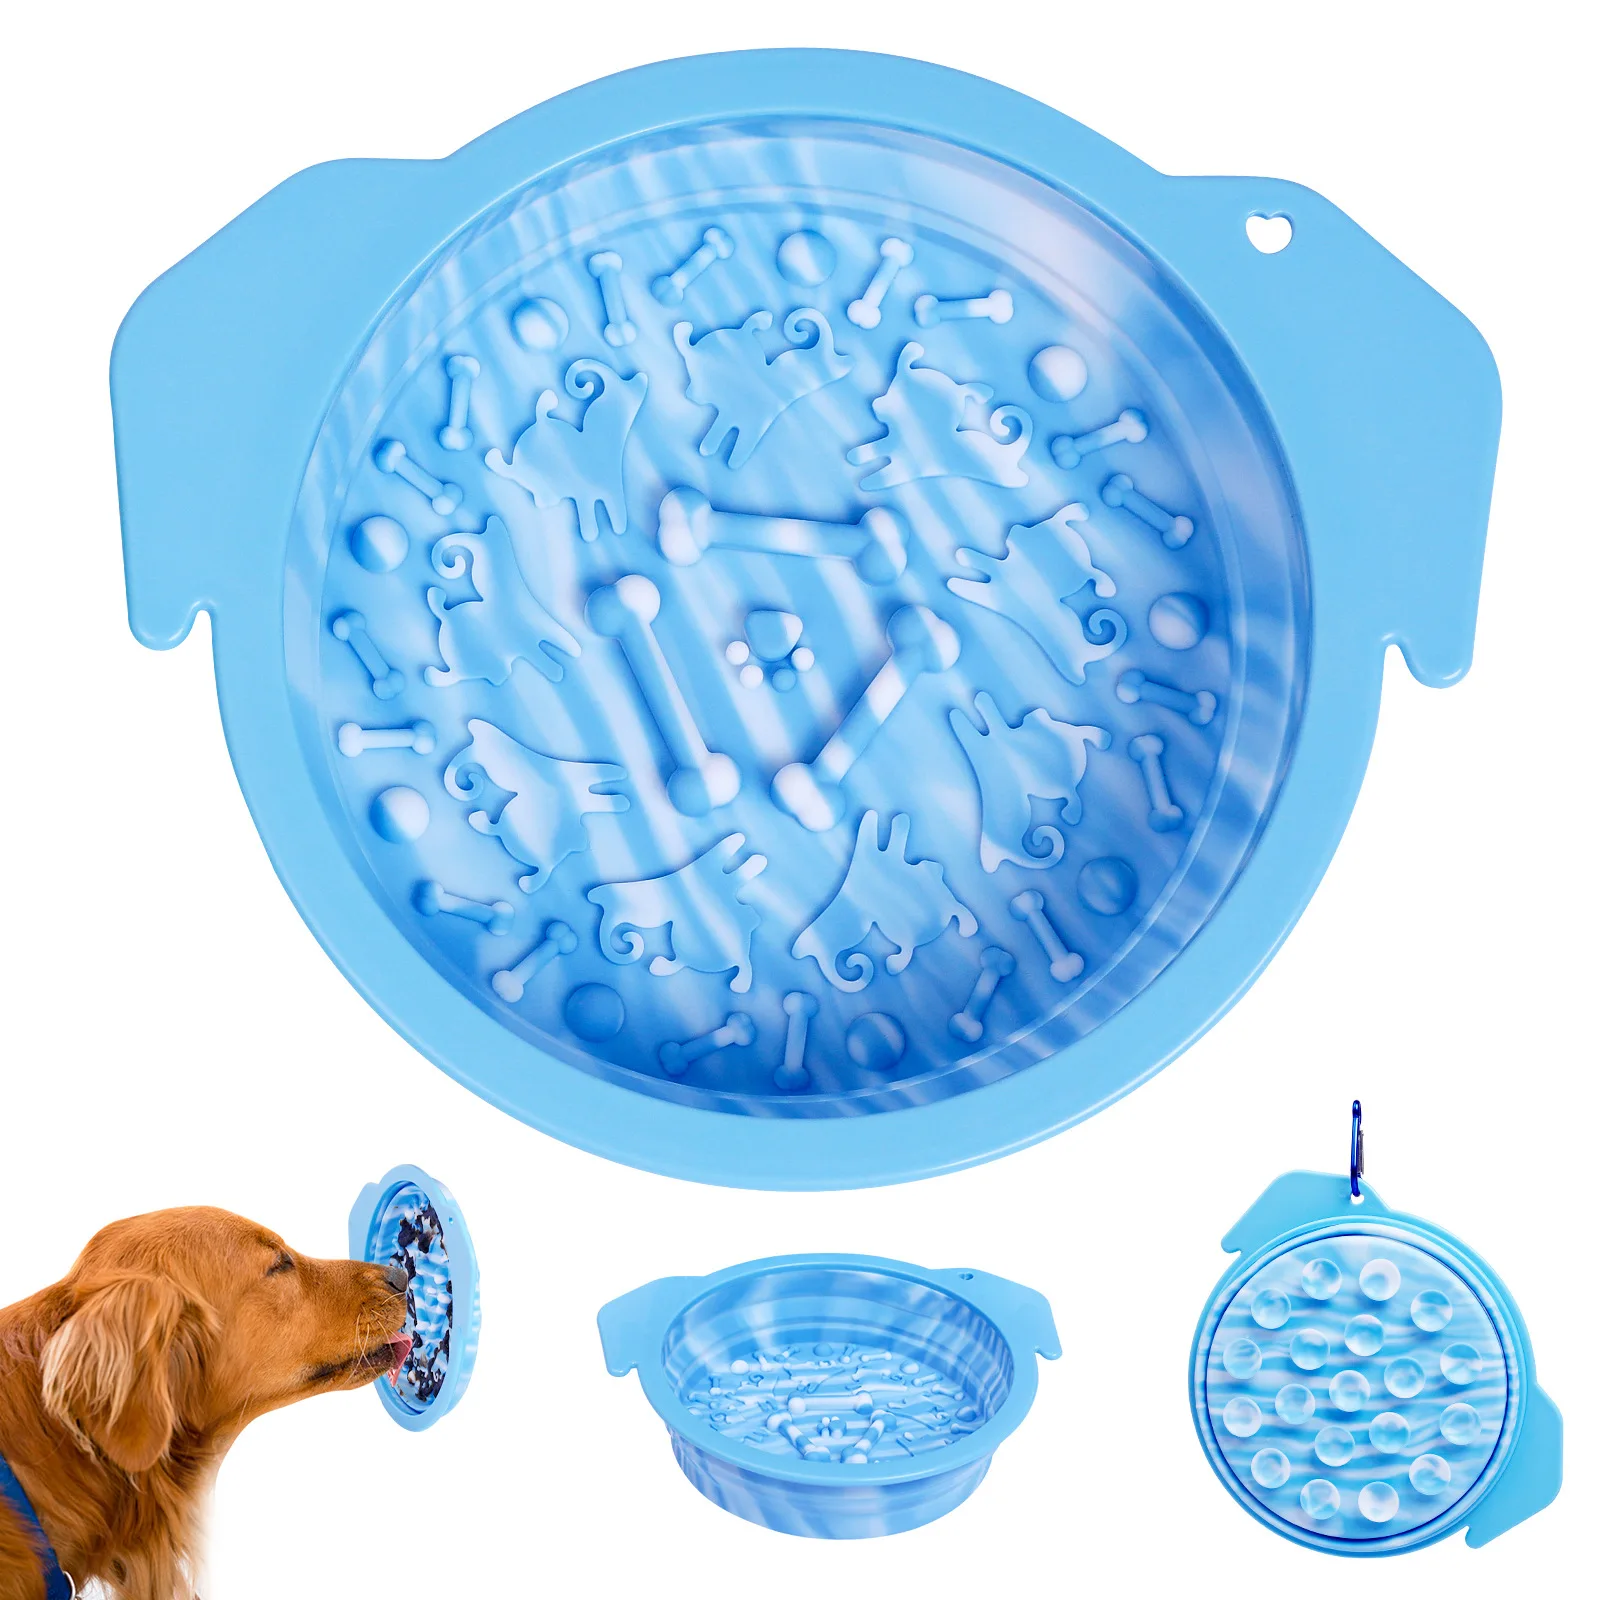 Creative Collapsible Dog Pet Folding Silicone Bowl Outdoor Travel Portable Puppy Food Container Feeder Dish Bowl Training Tool